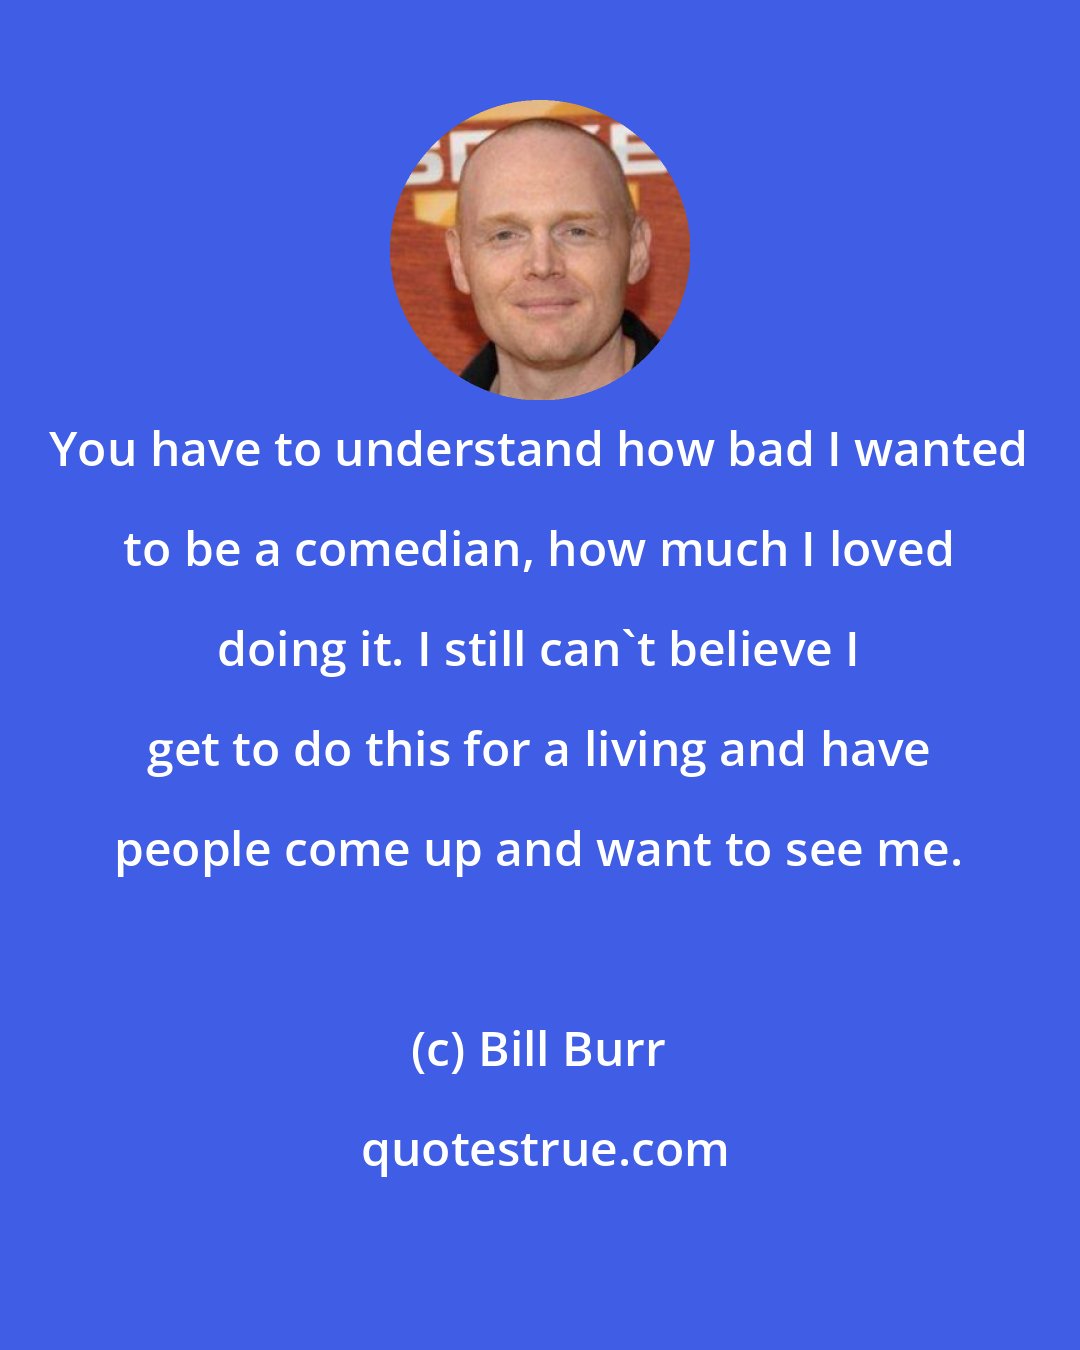 Bill Burr: You have to understand how bad I wanted to be a comedian, how much I loved doing it. I still can't believe I get to do this for a living and have people come up and want to see me.